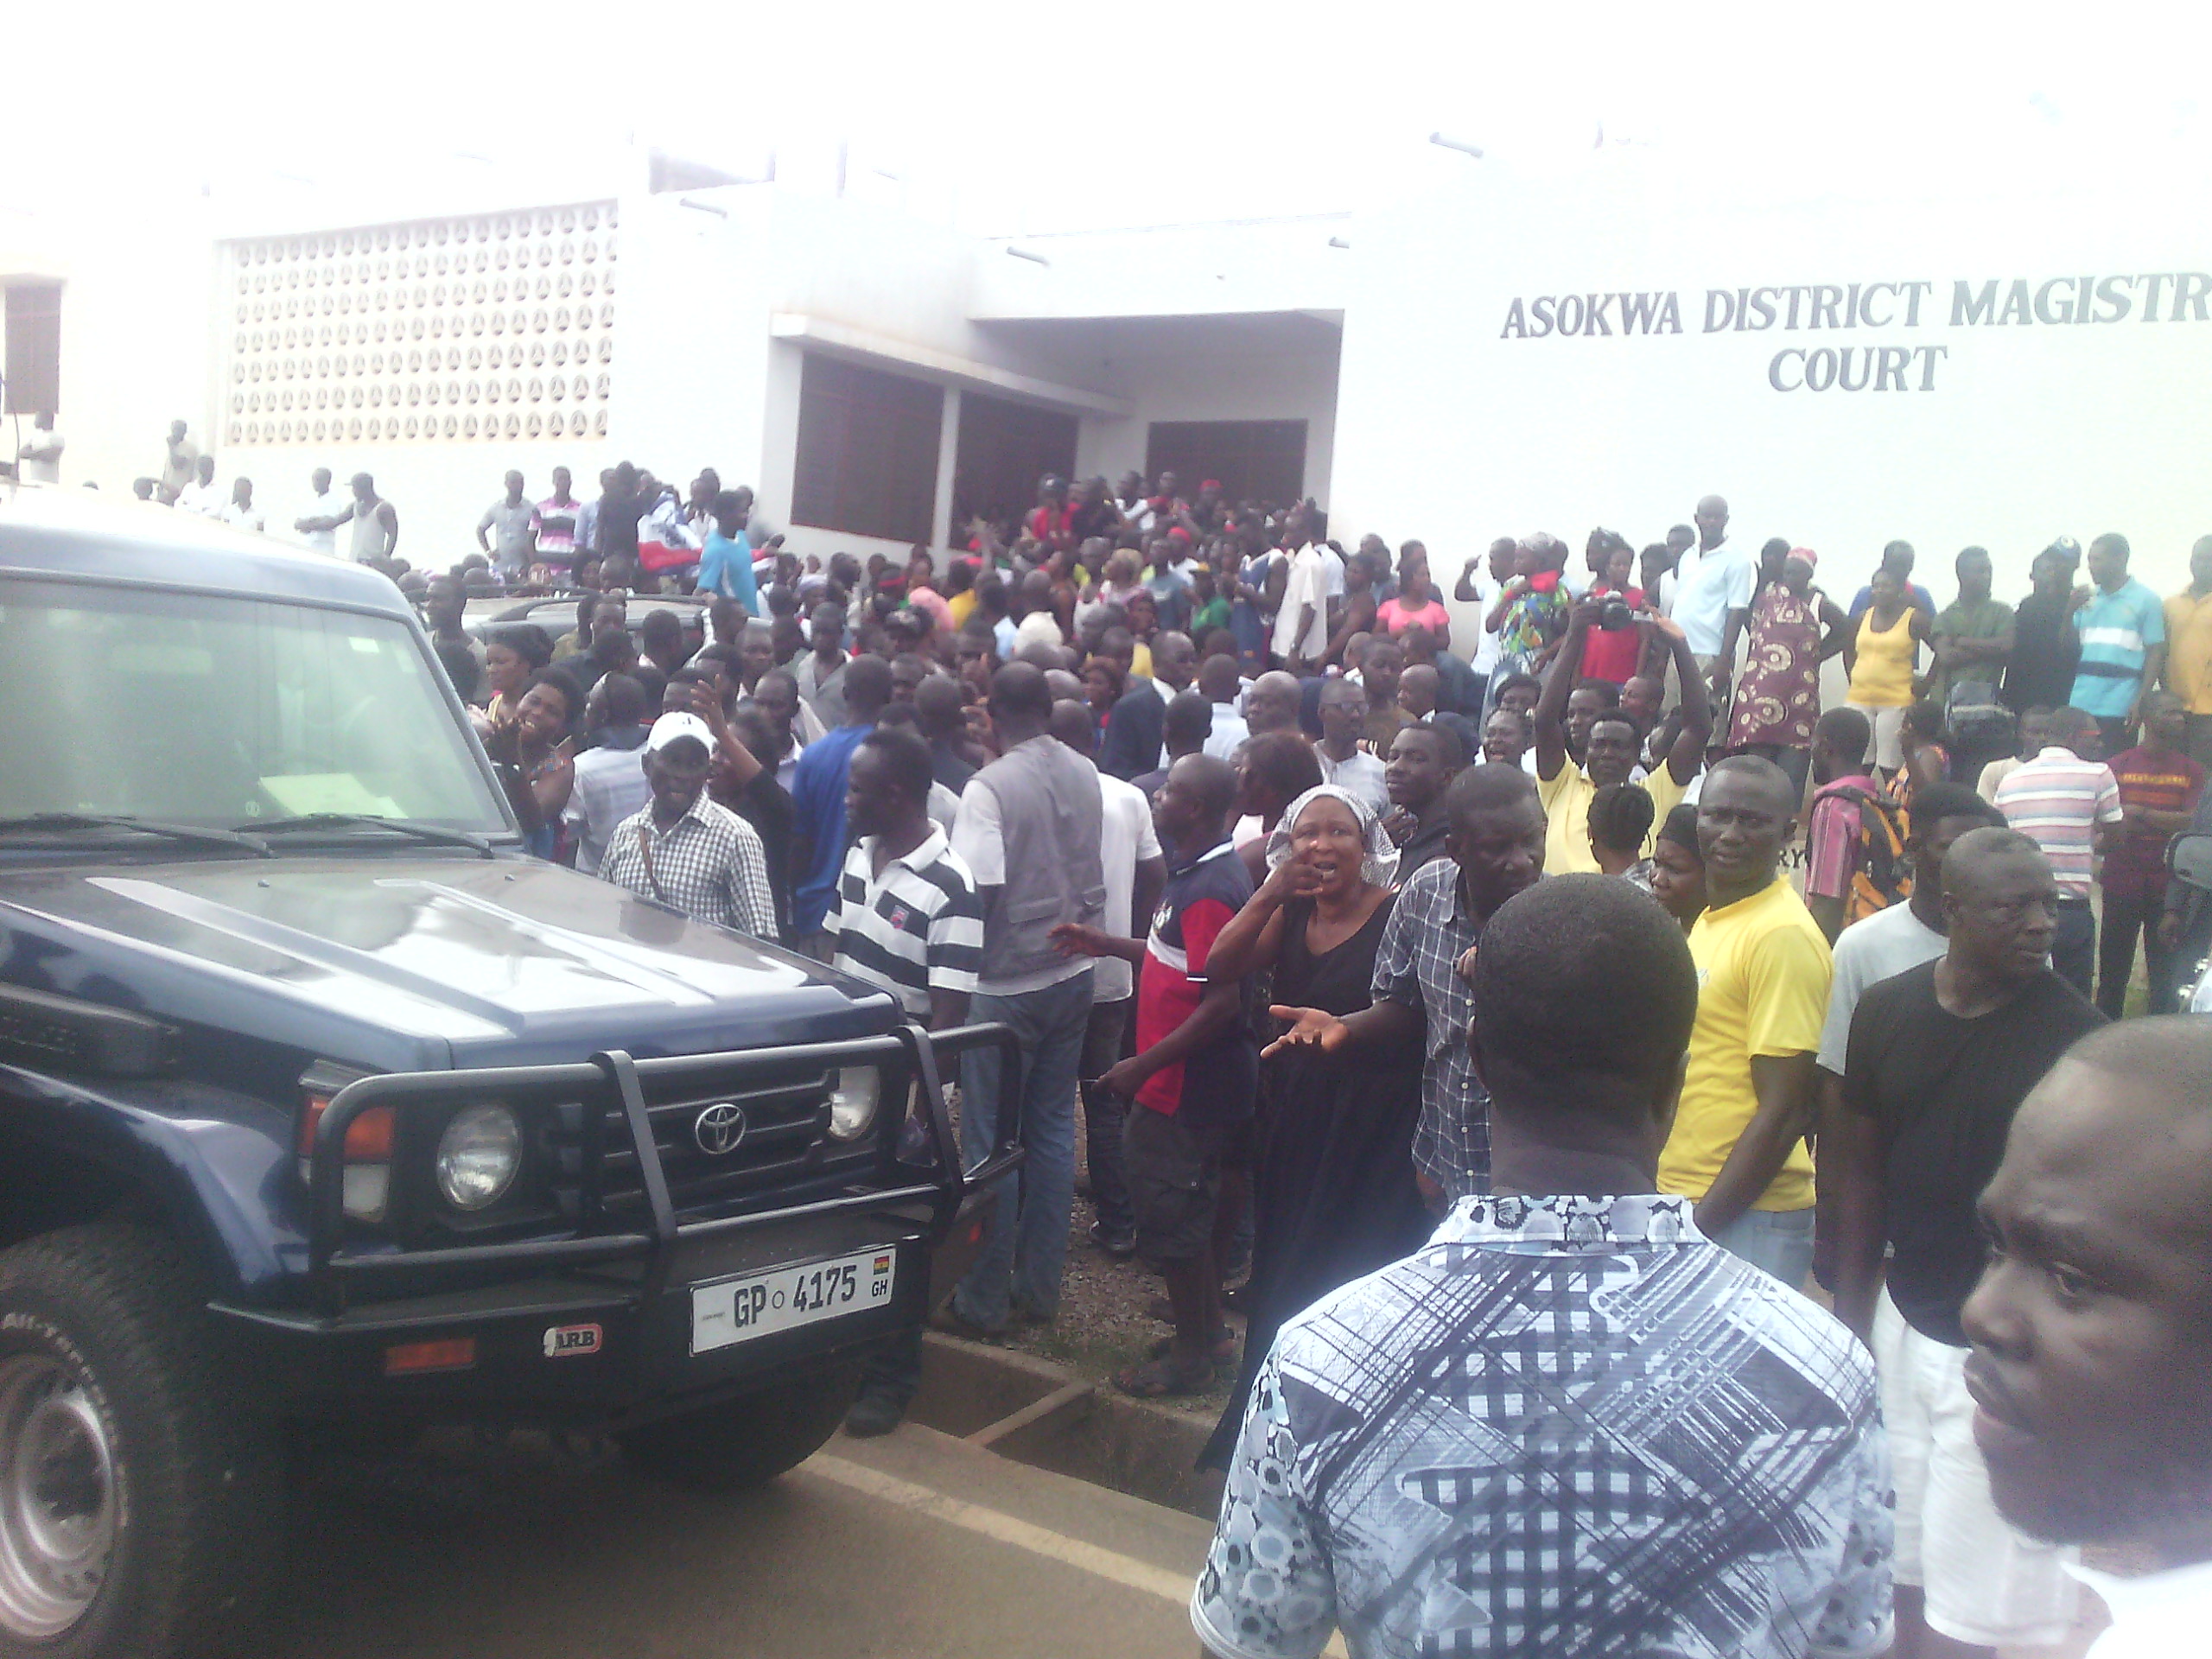 New Patriotic Party Supporters In Ashanti Region at Kumasi Magistrate Court.